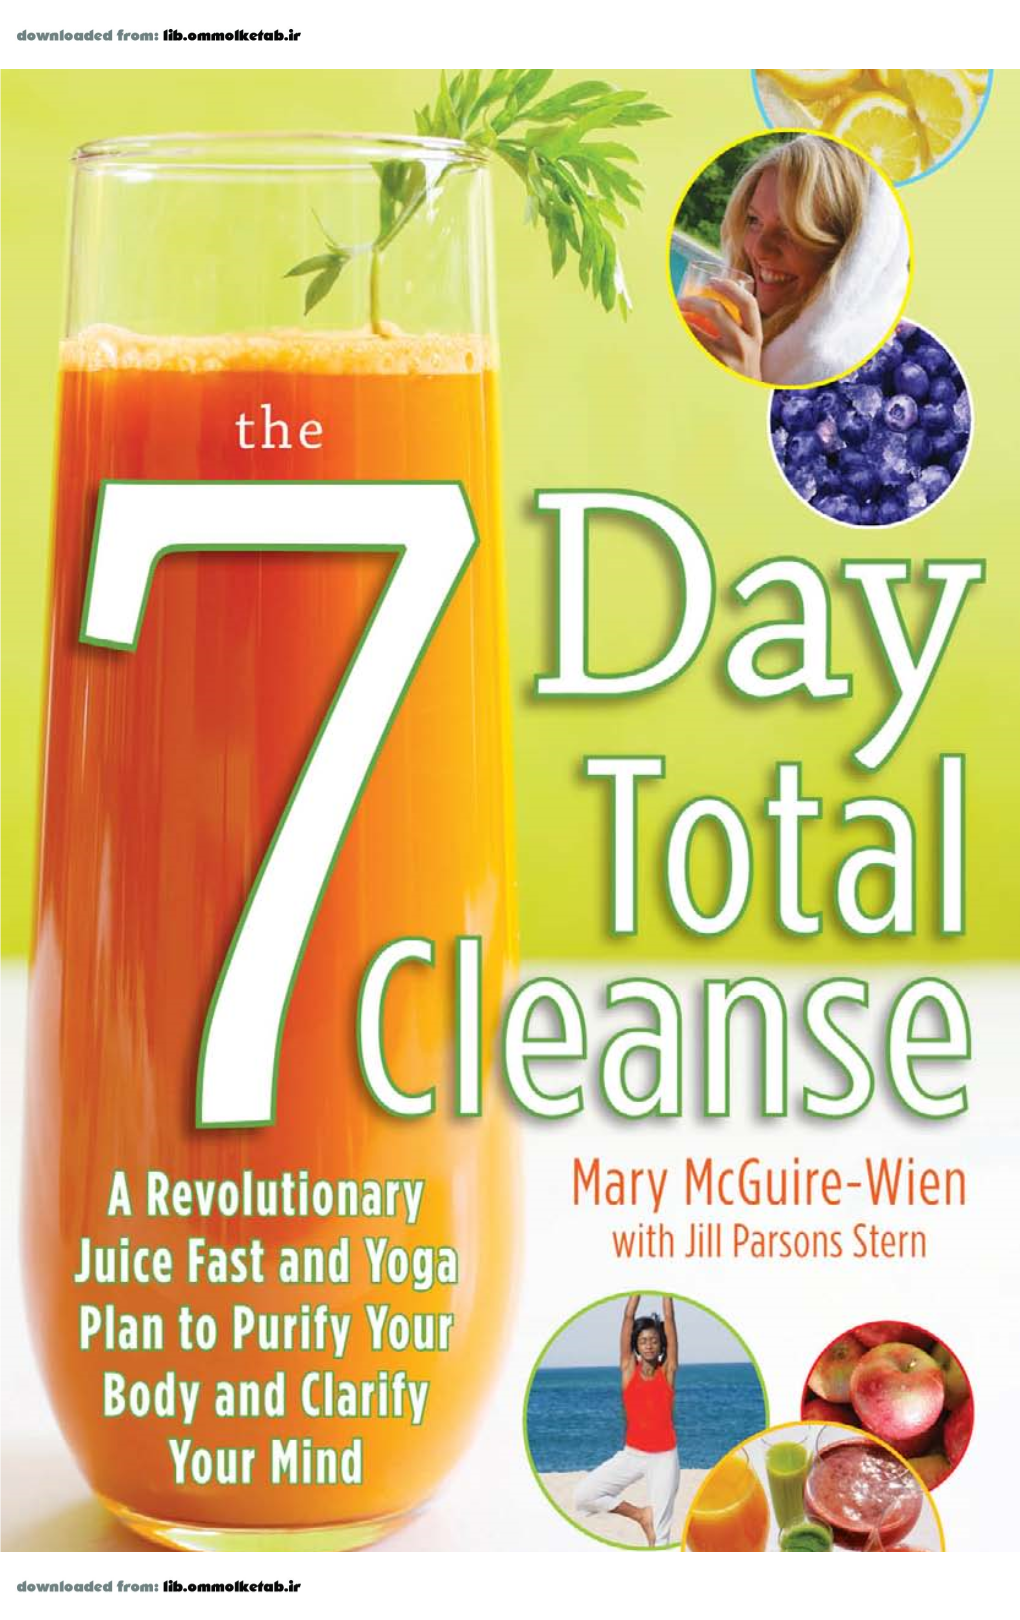 15 Juices, Smoothies, and Recipes for the Days Following Your Cleanse